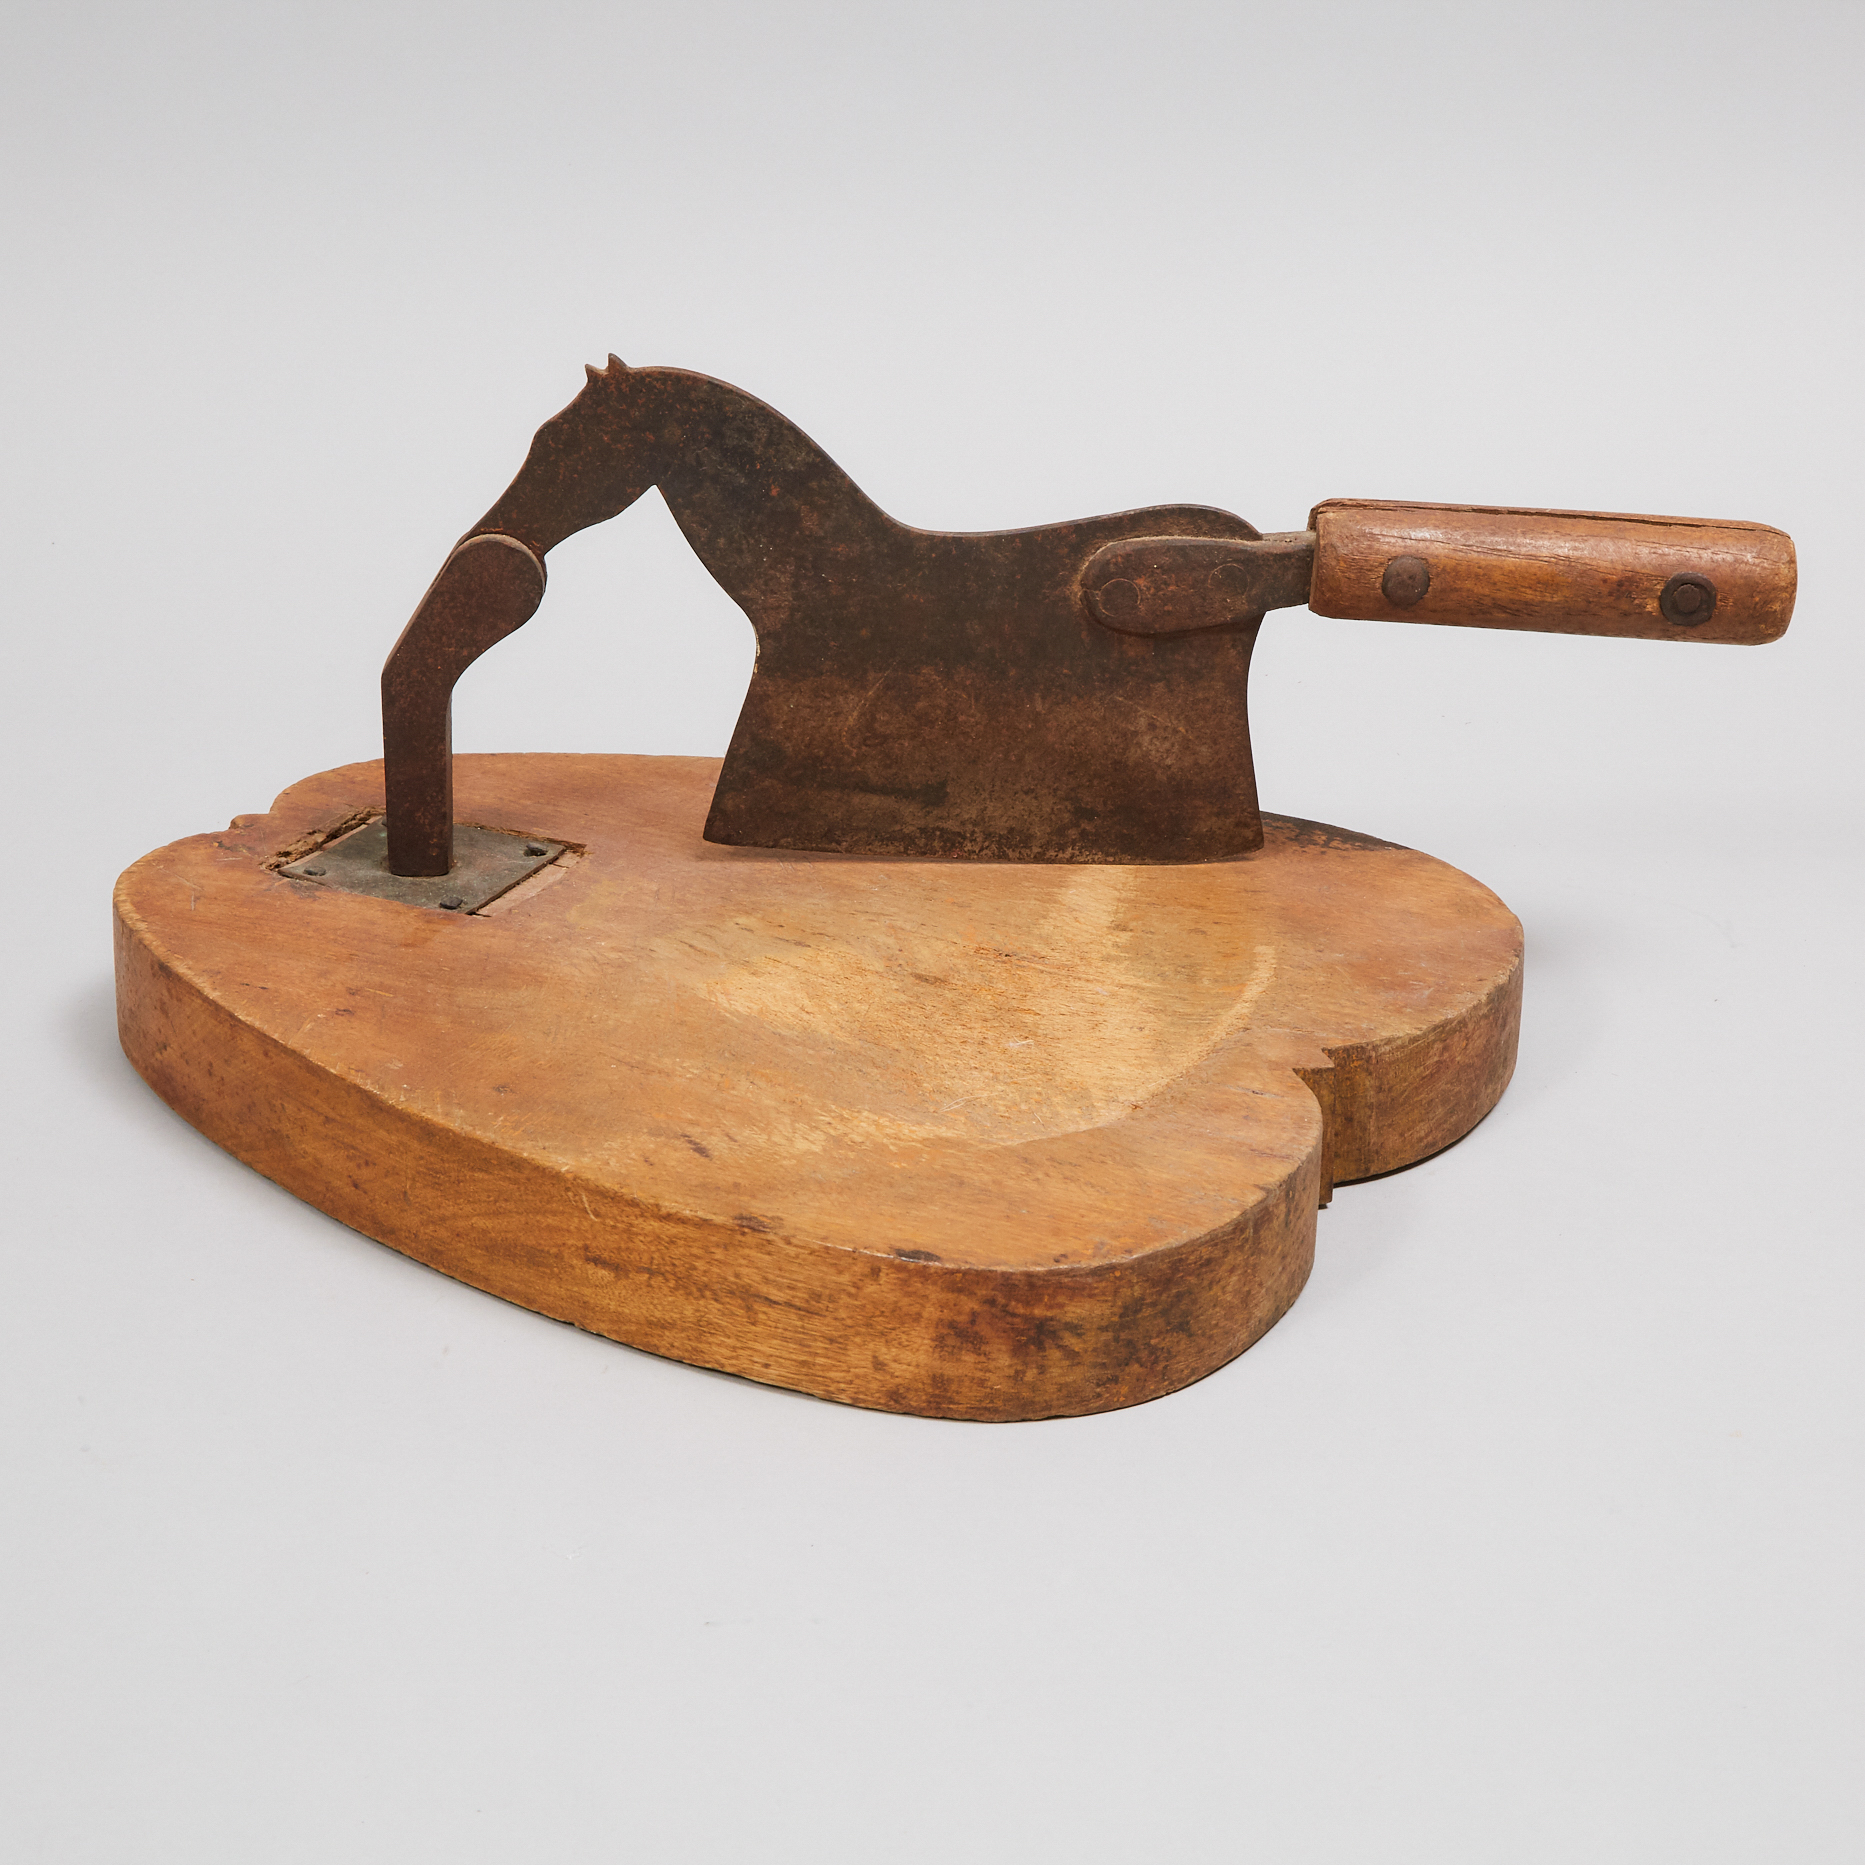 Quebec Horse Form Tobacco Cutter, 19th century